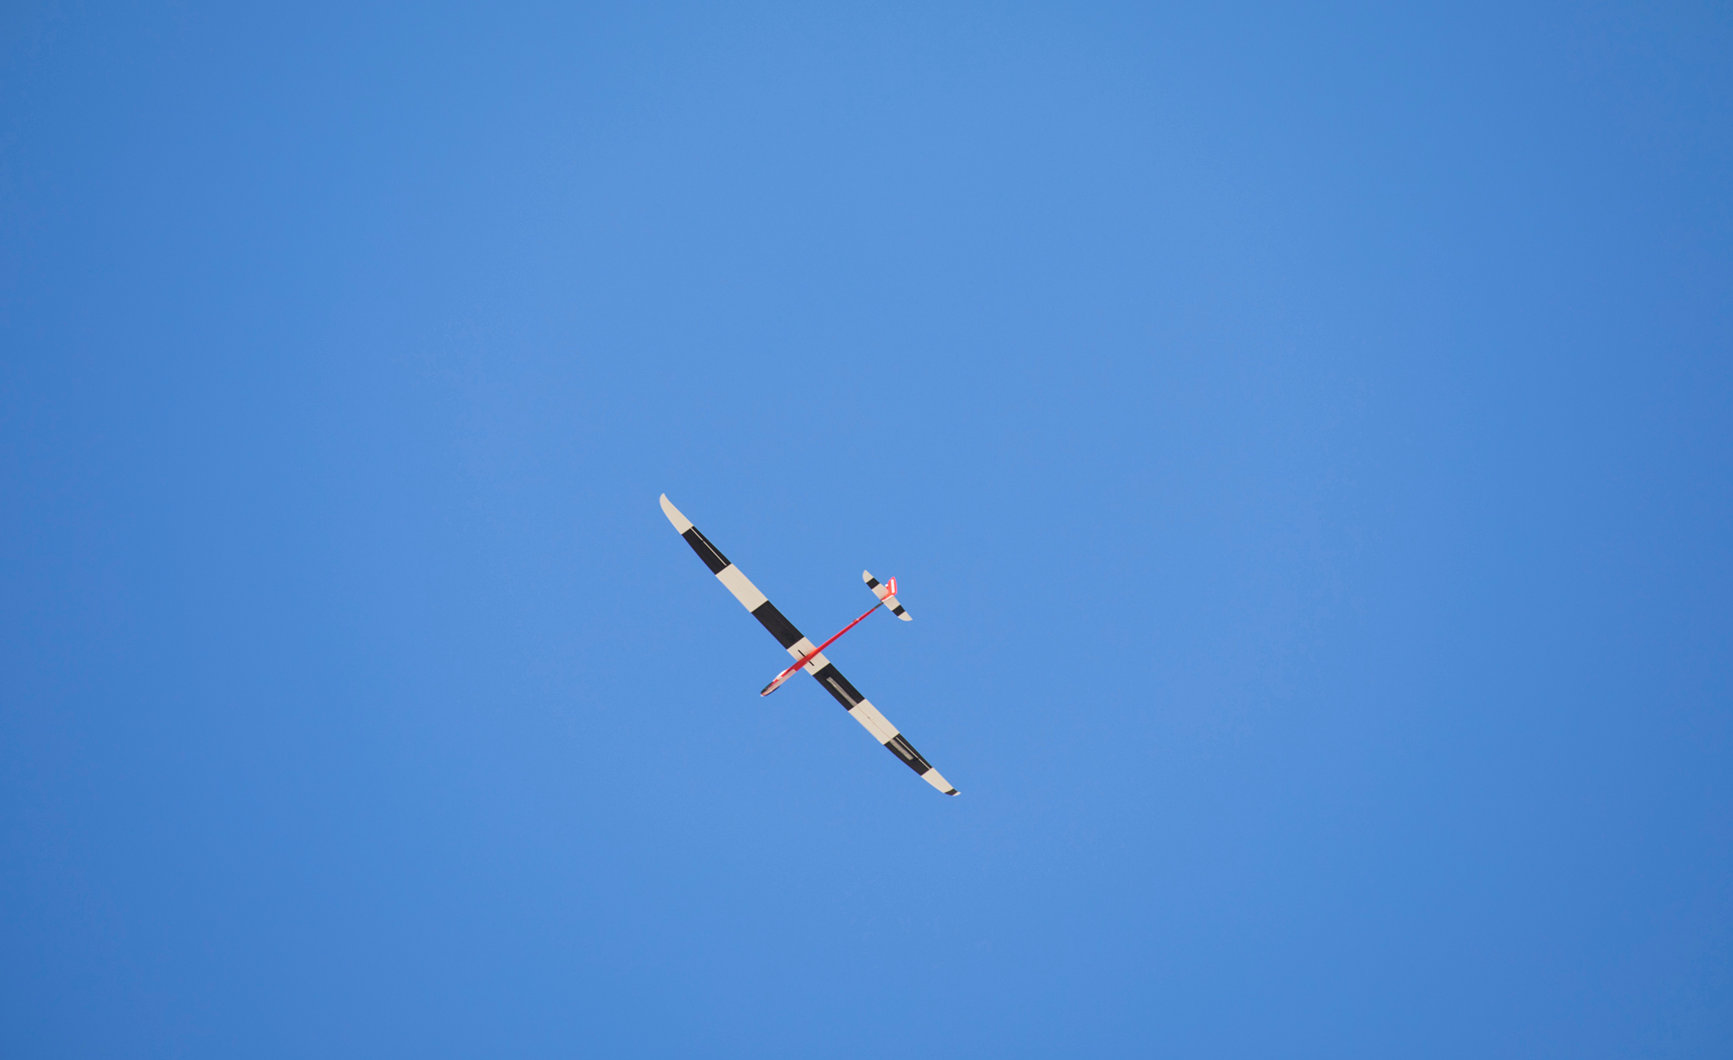 Microsoft’s autonomous gliders seek out thermal updrafts to stay aloft